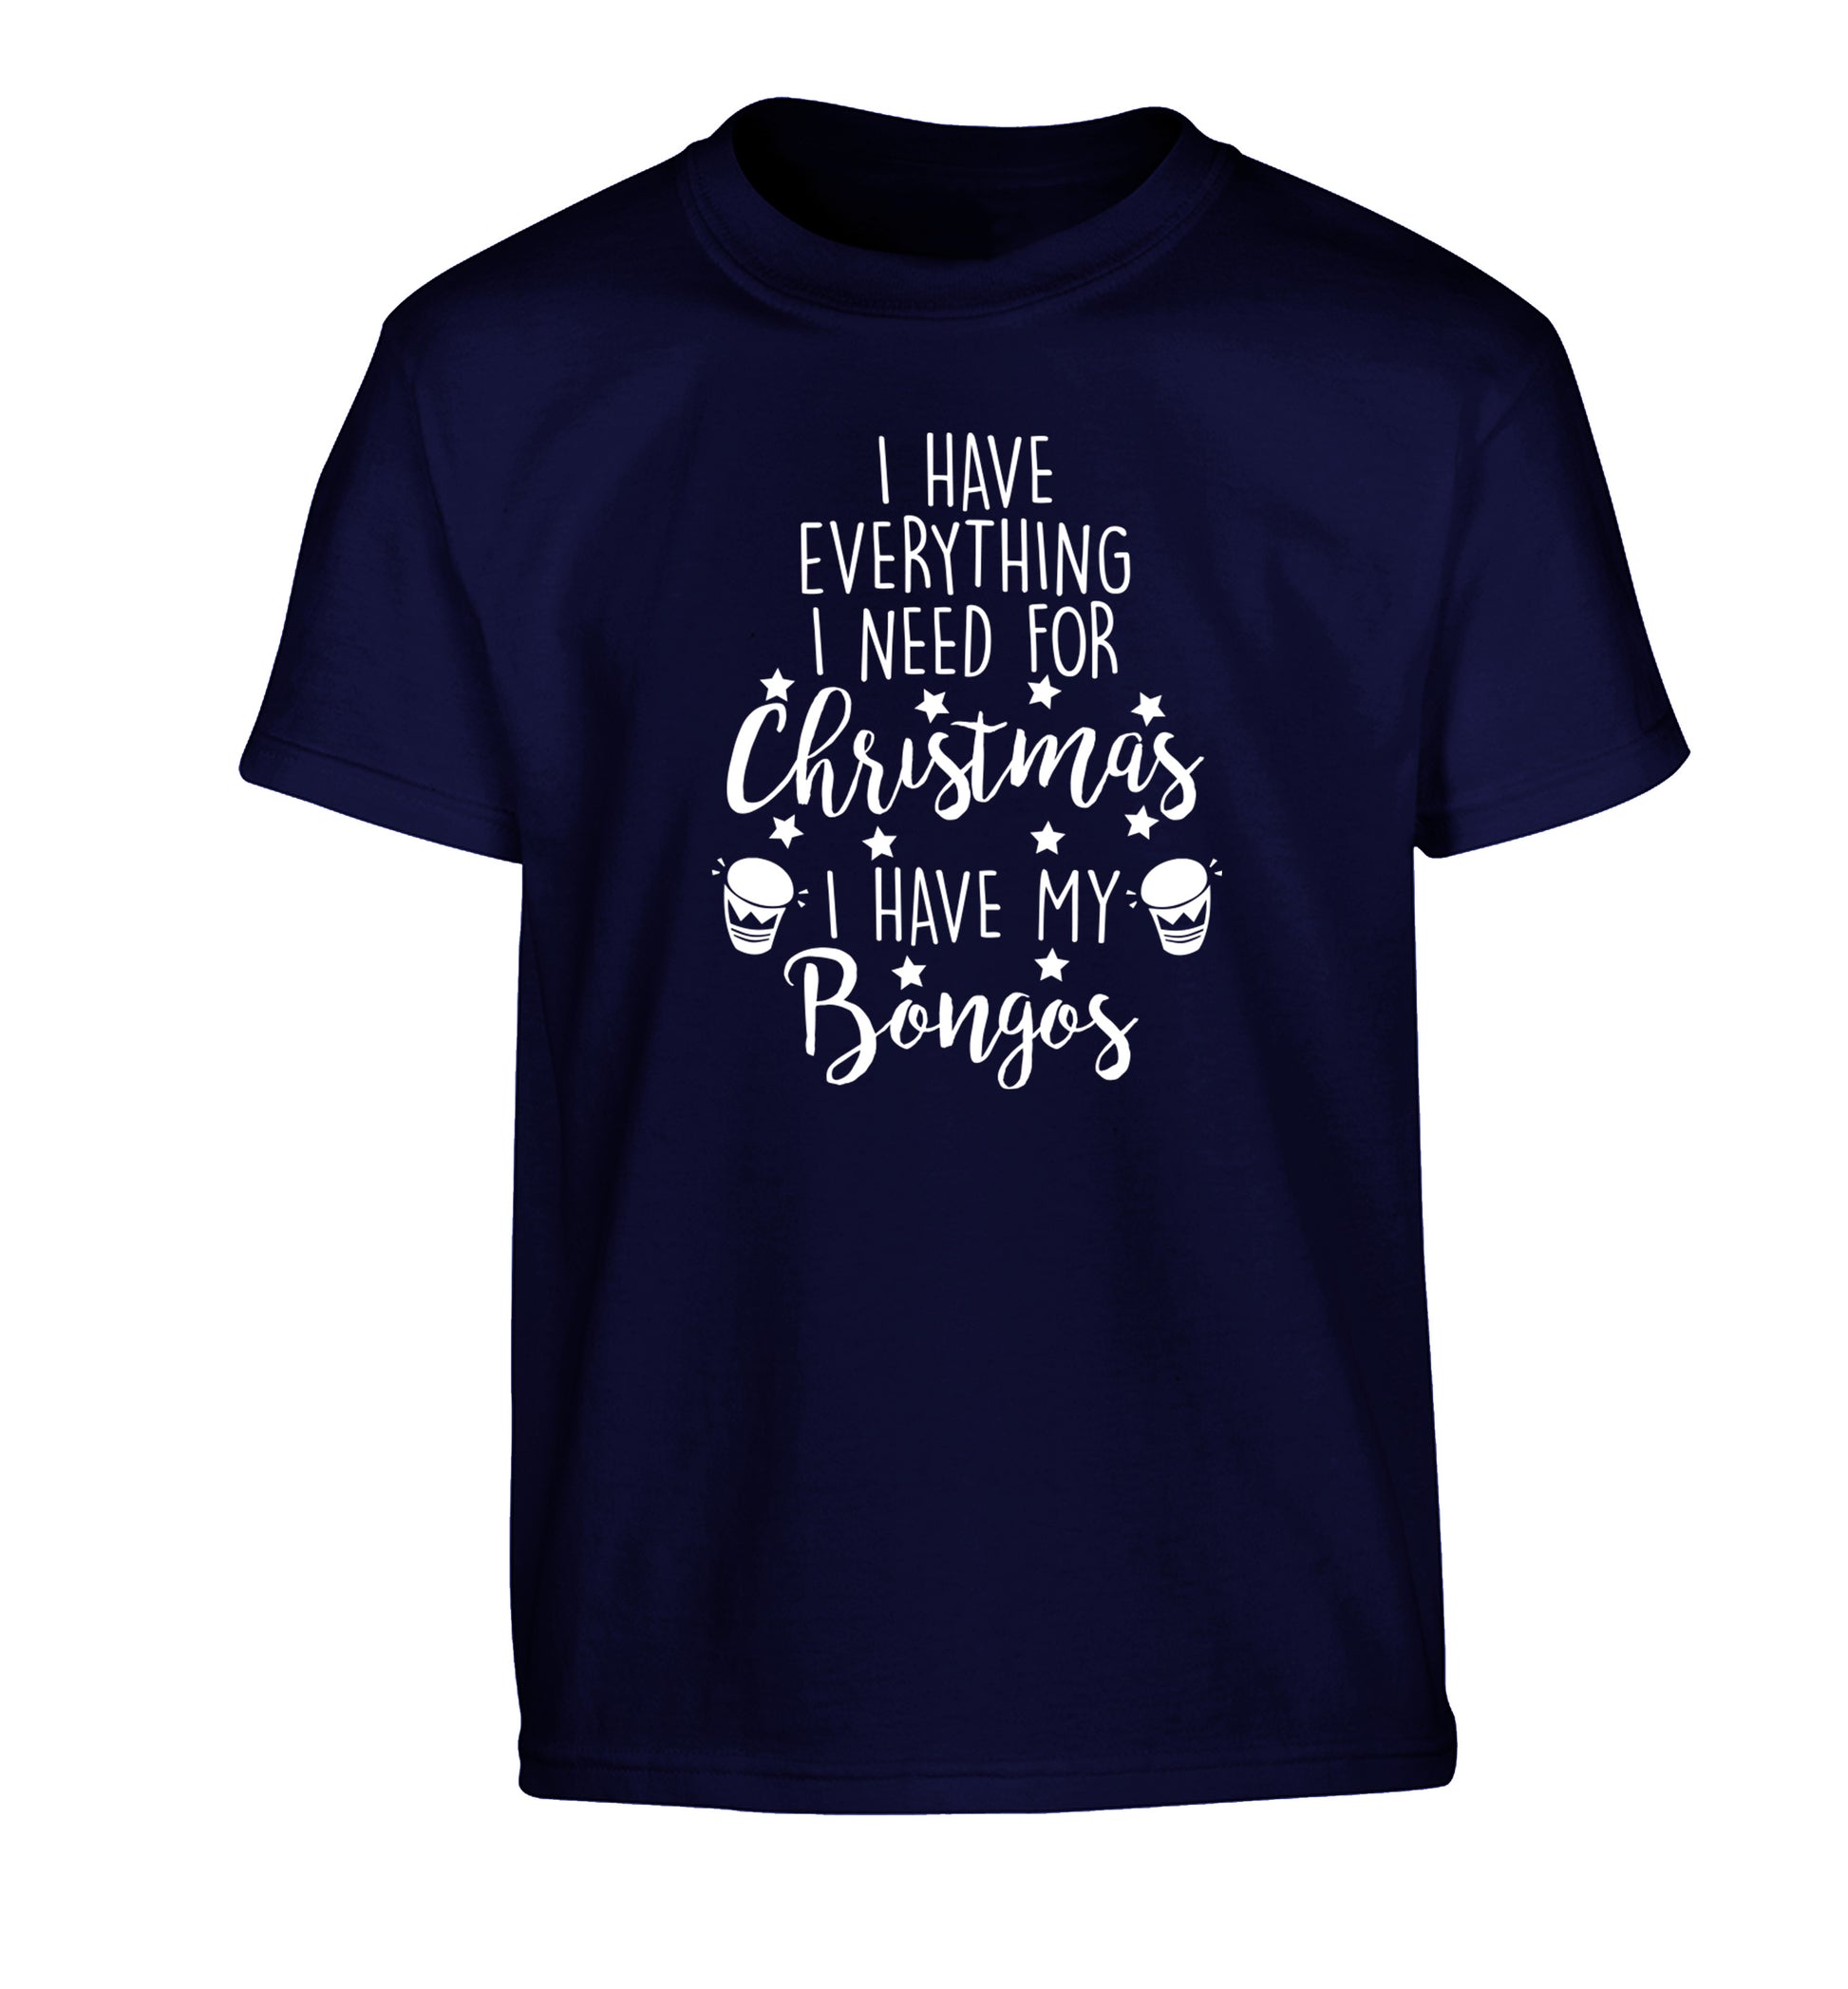 I have everything I need for Christmas I have my bongos! Children's navy Tshirt 12-14 Years